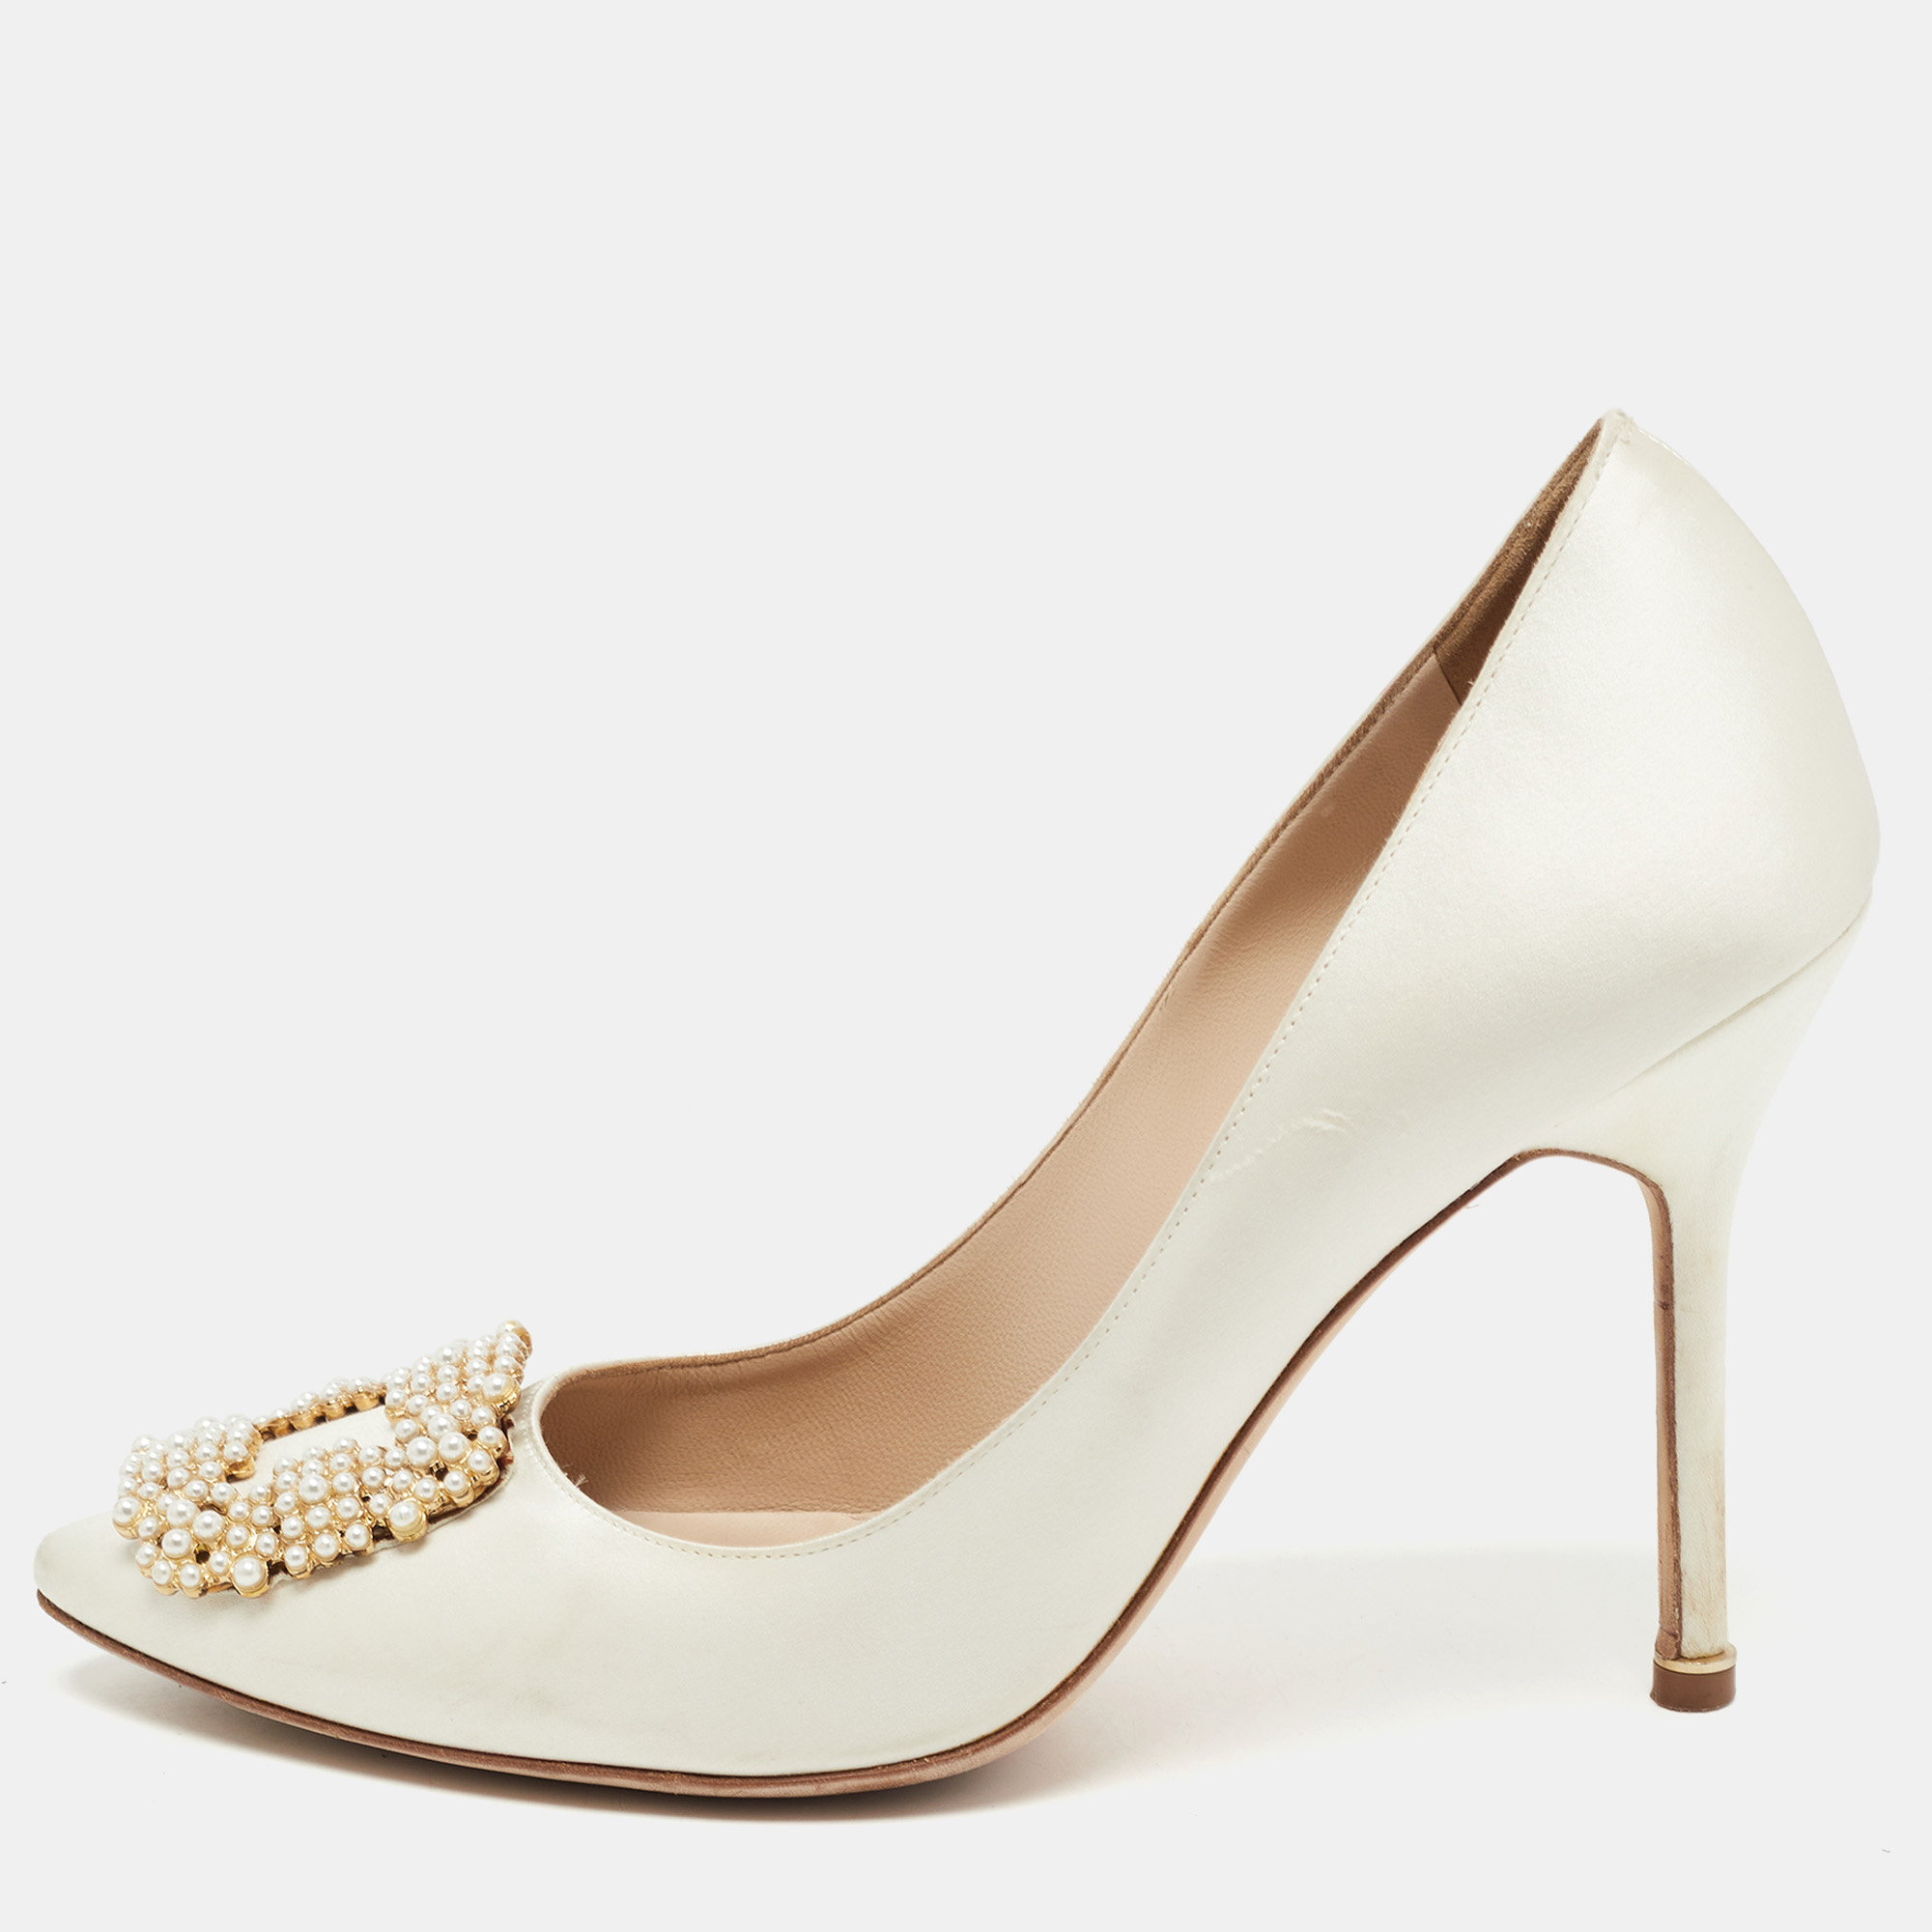 Pre-owned Manolo Blahnik White Satin Faux Pearl Embellished Hangisi Pumps Size 40